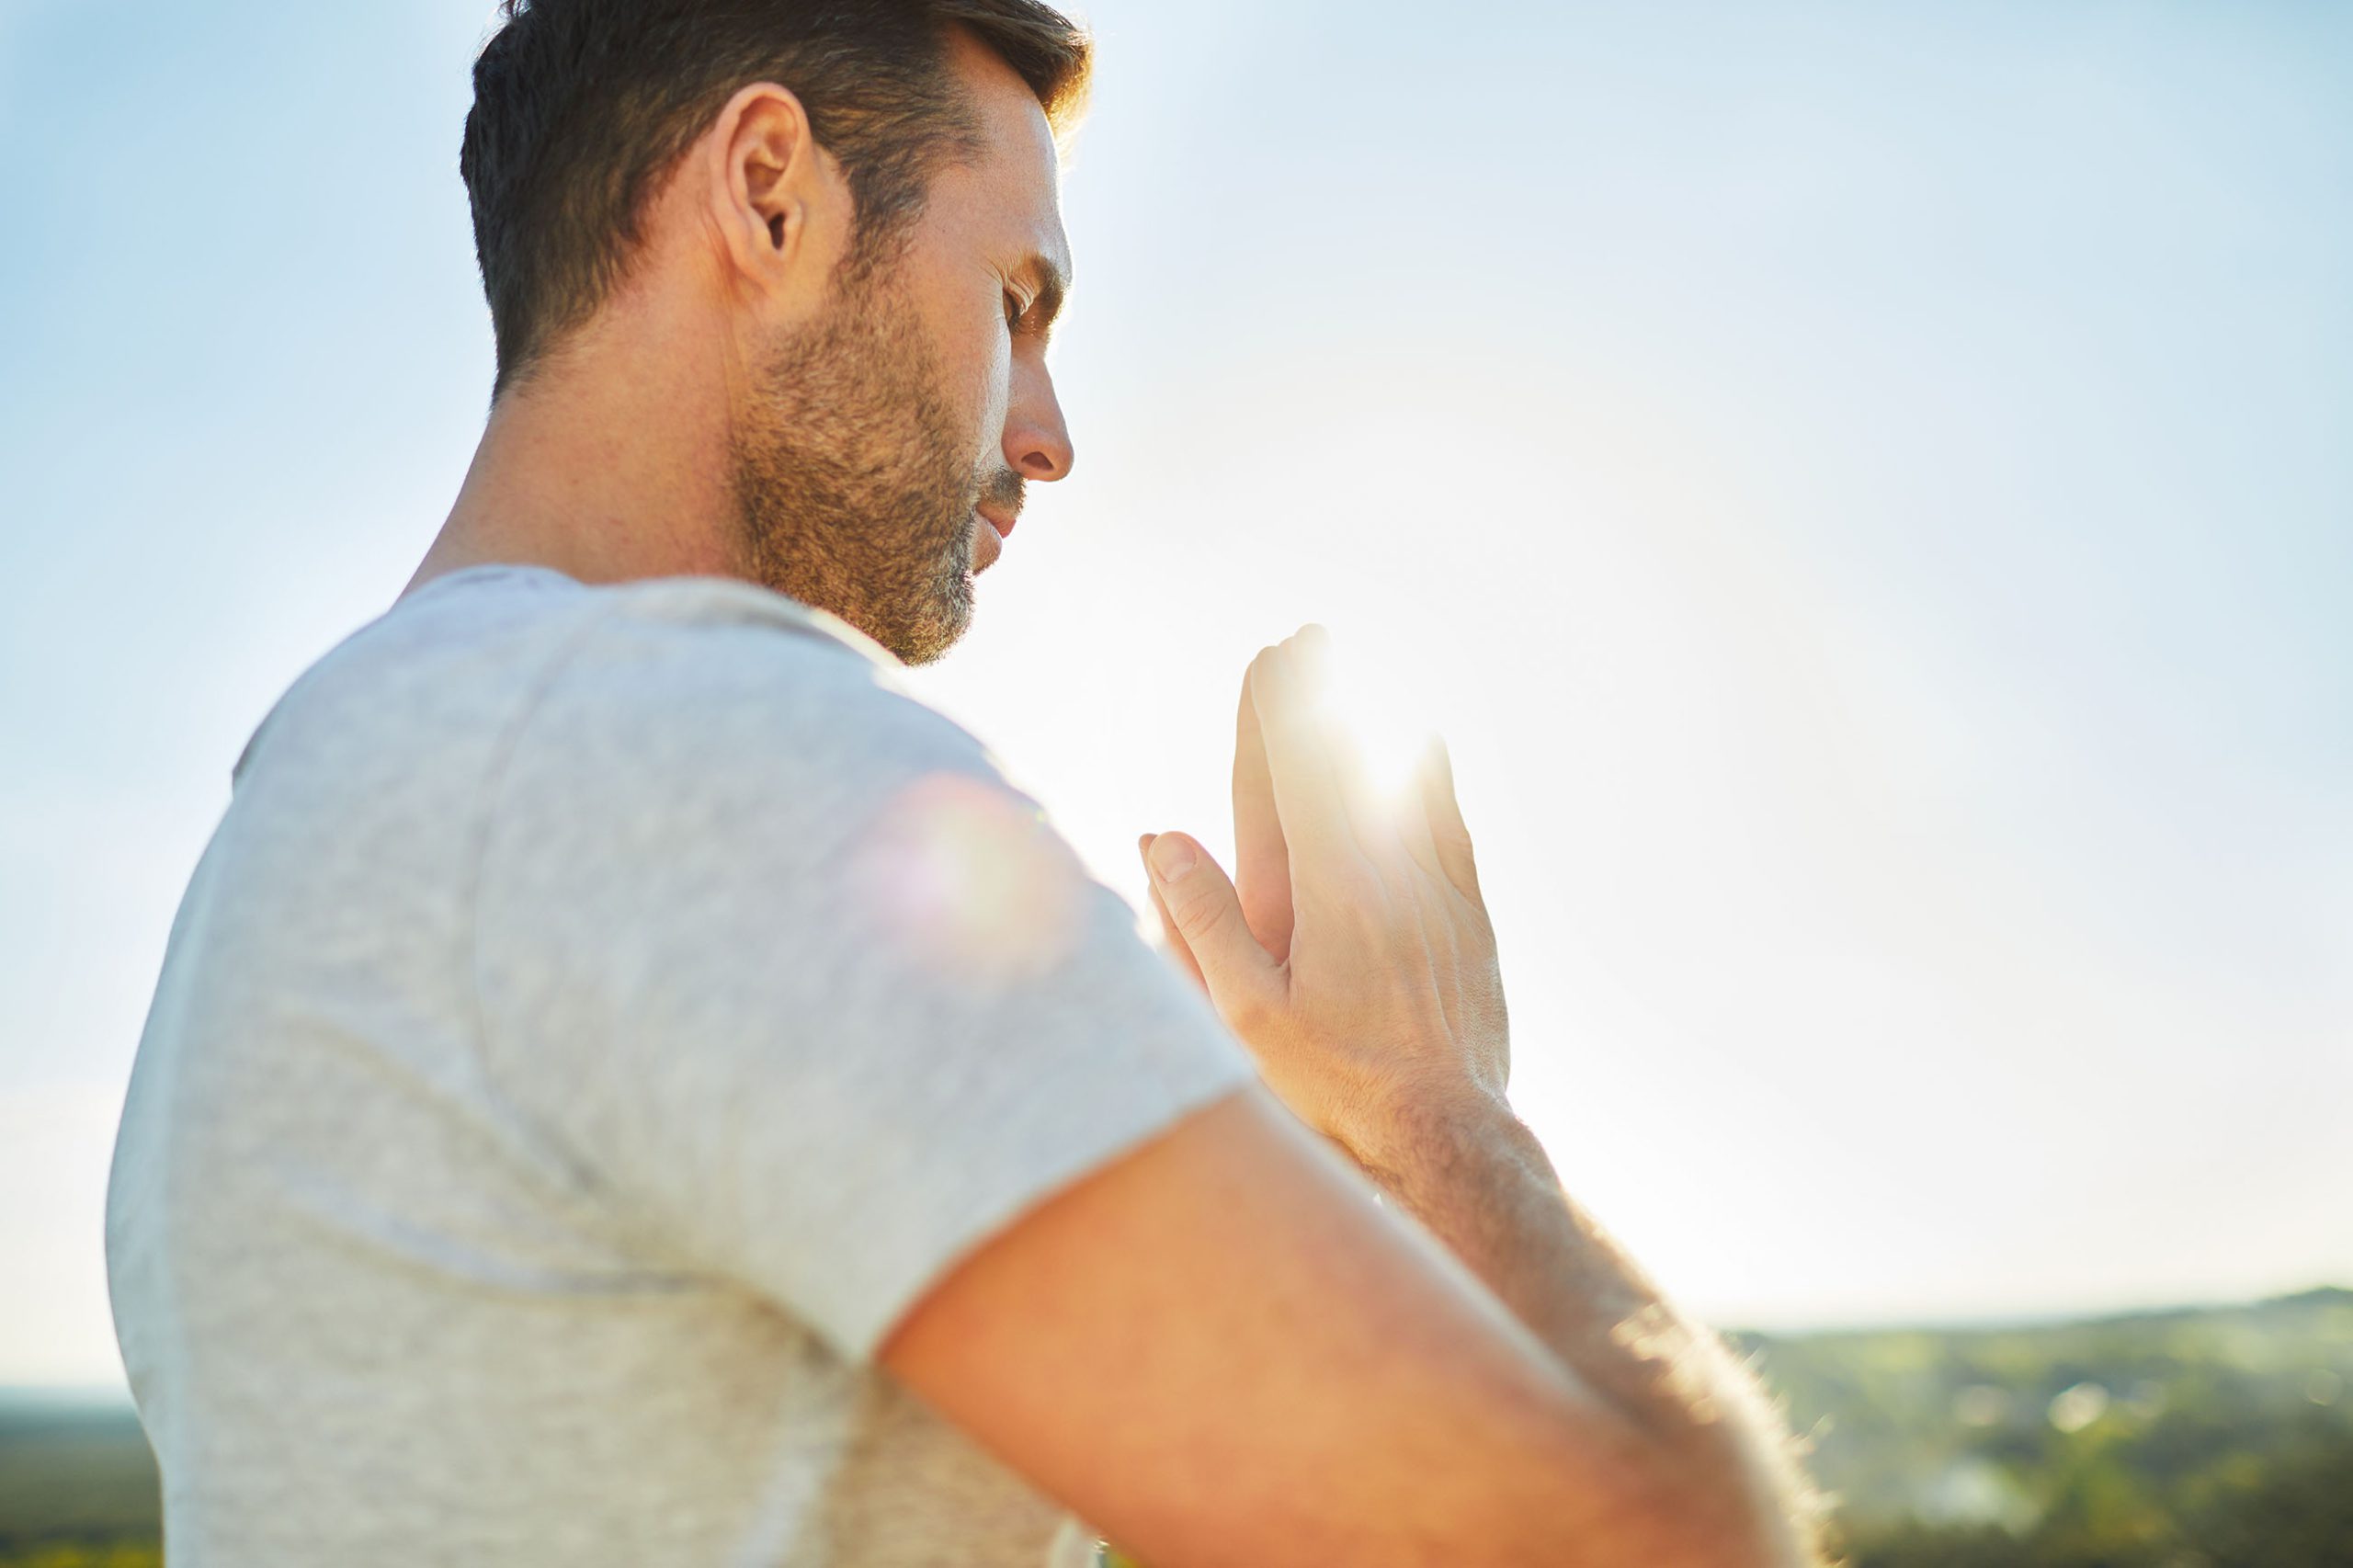 Adult man meditation outdoors with hands in prayer